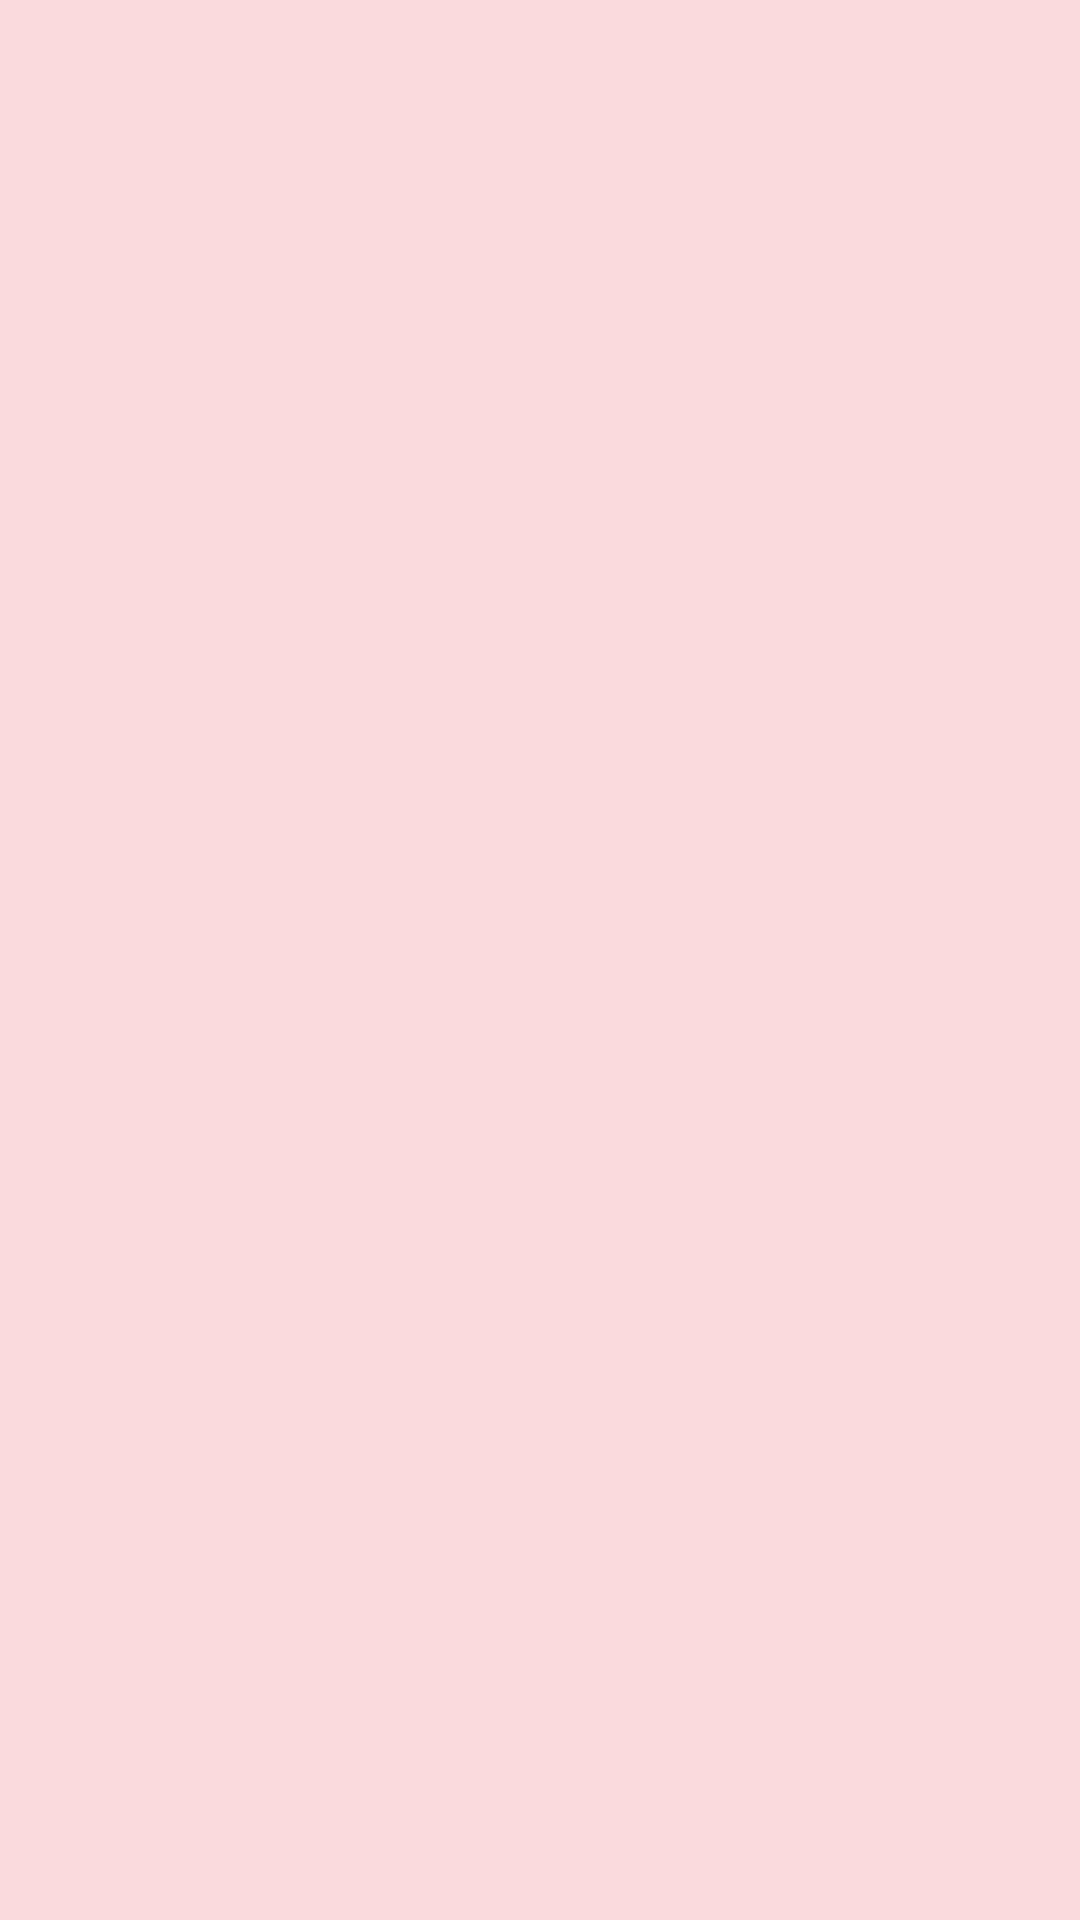 1080x1920 Pale Pink Solid Color Background